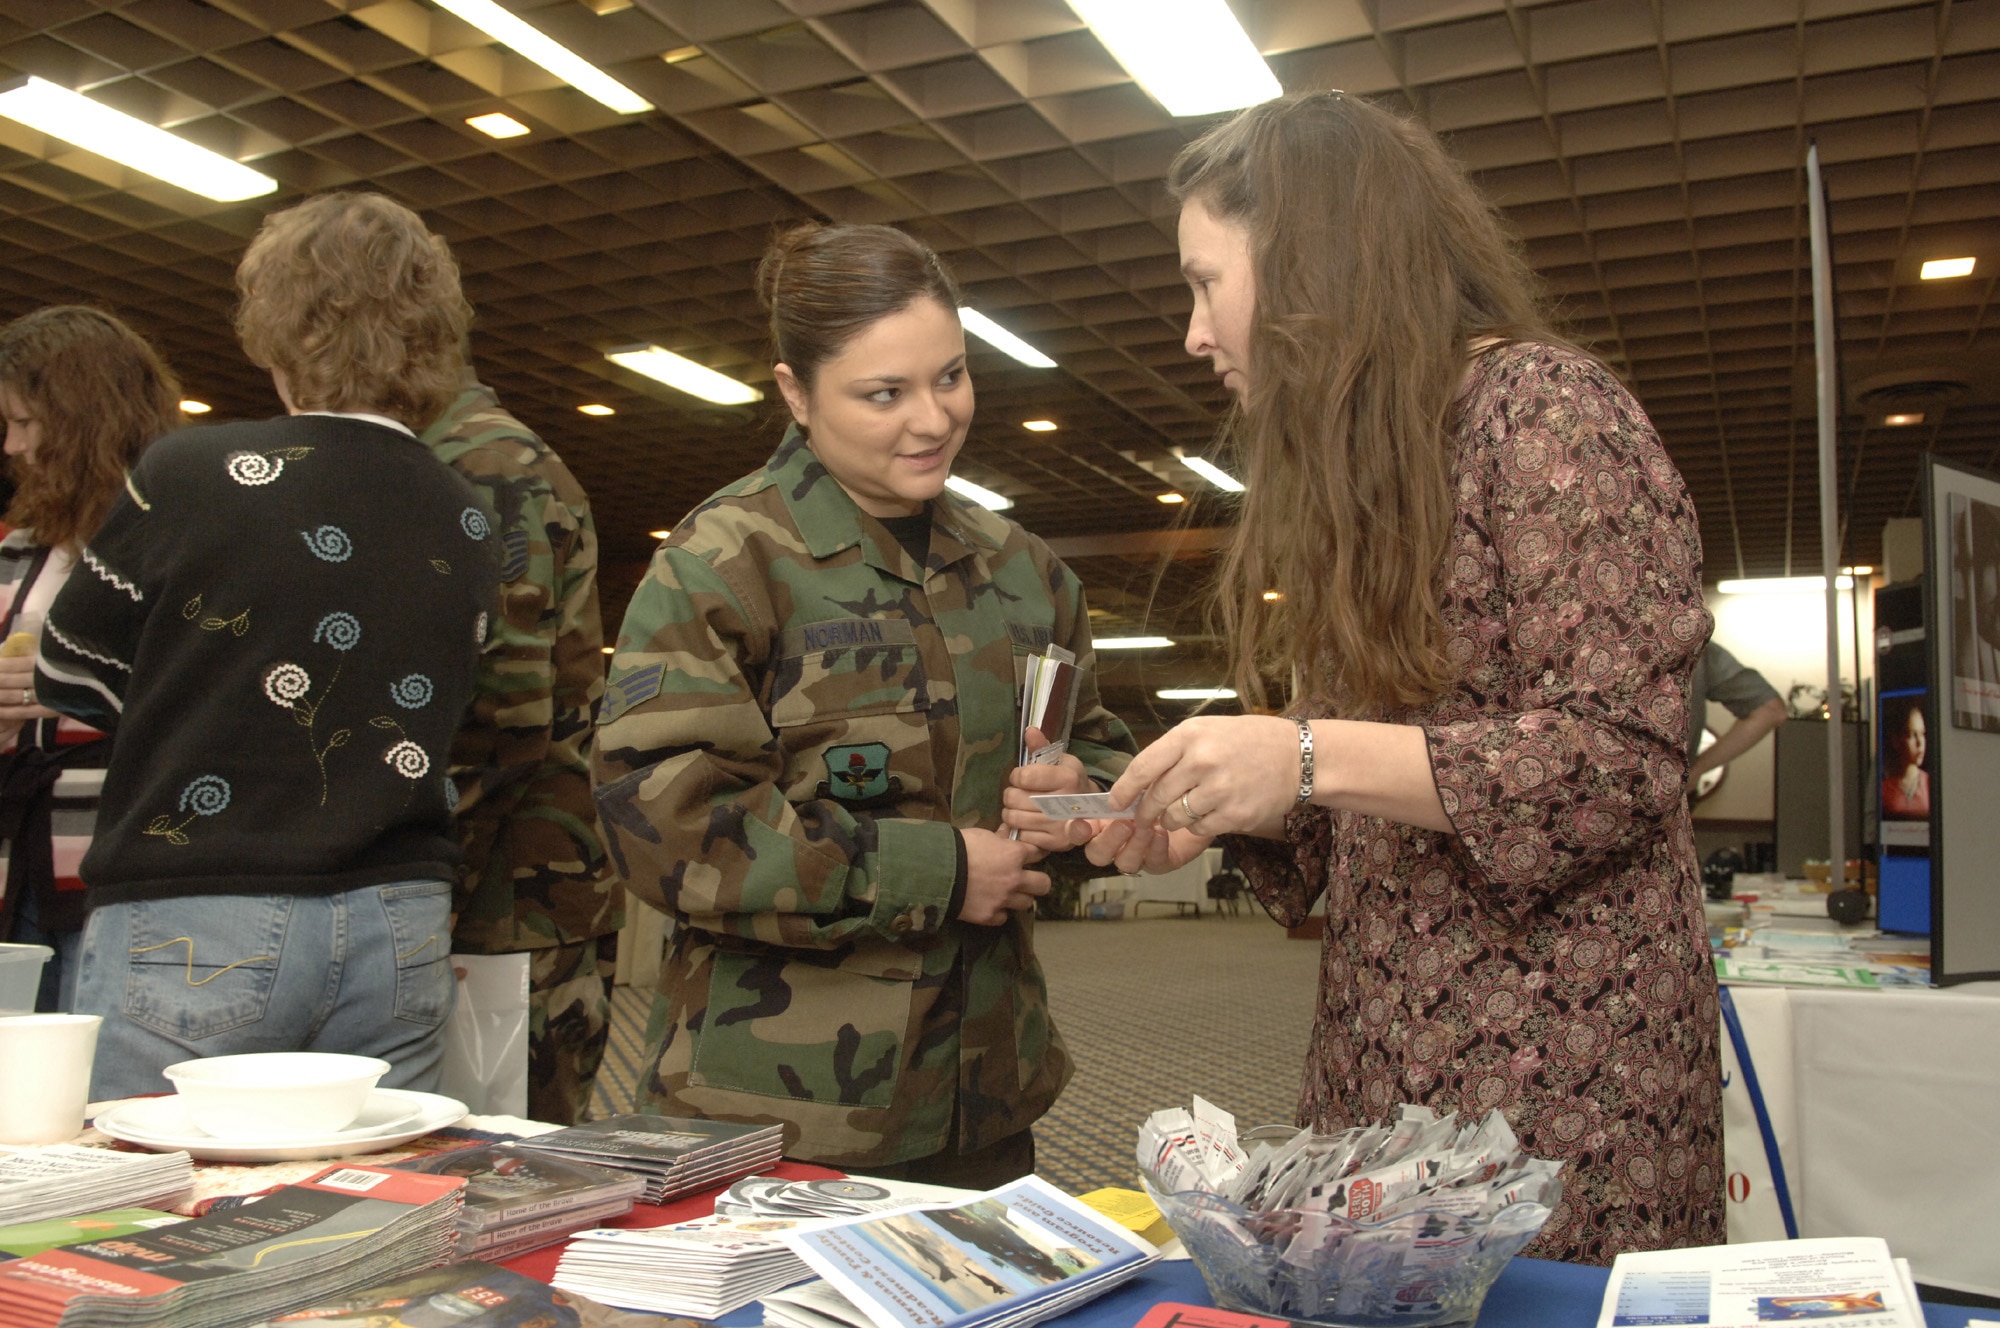 Senior Airman Tara Norman, 336th Training Support Squadron, accepts base information from Melissa Still of the Airman and Family Readiness Center at the Right Start seminar Jan. 12. Airman Norman arrived at Fairchild Nov. 4 from Kirtland Air Force Base, N.M.